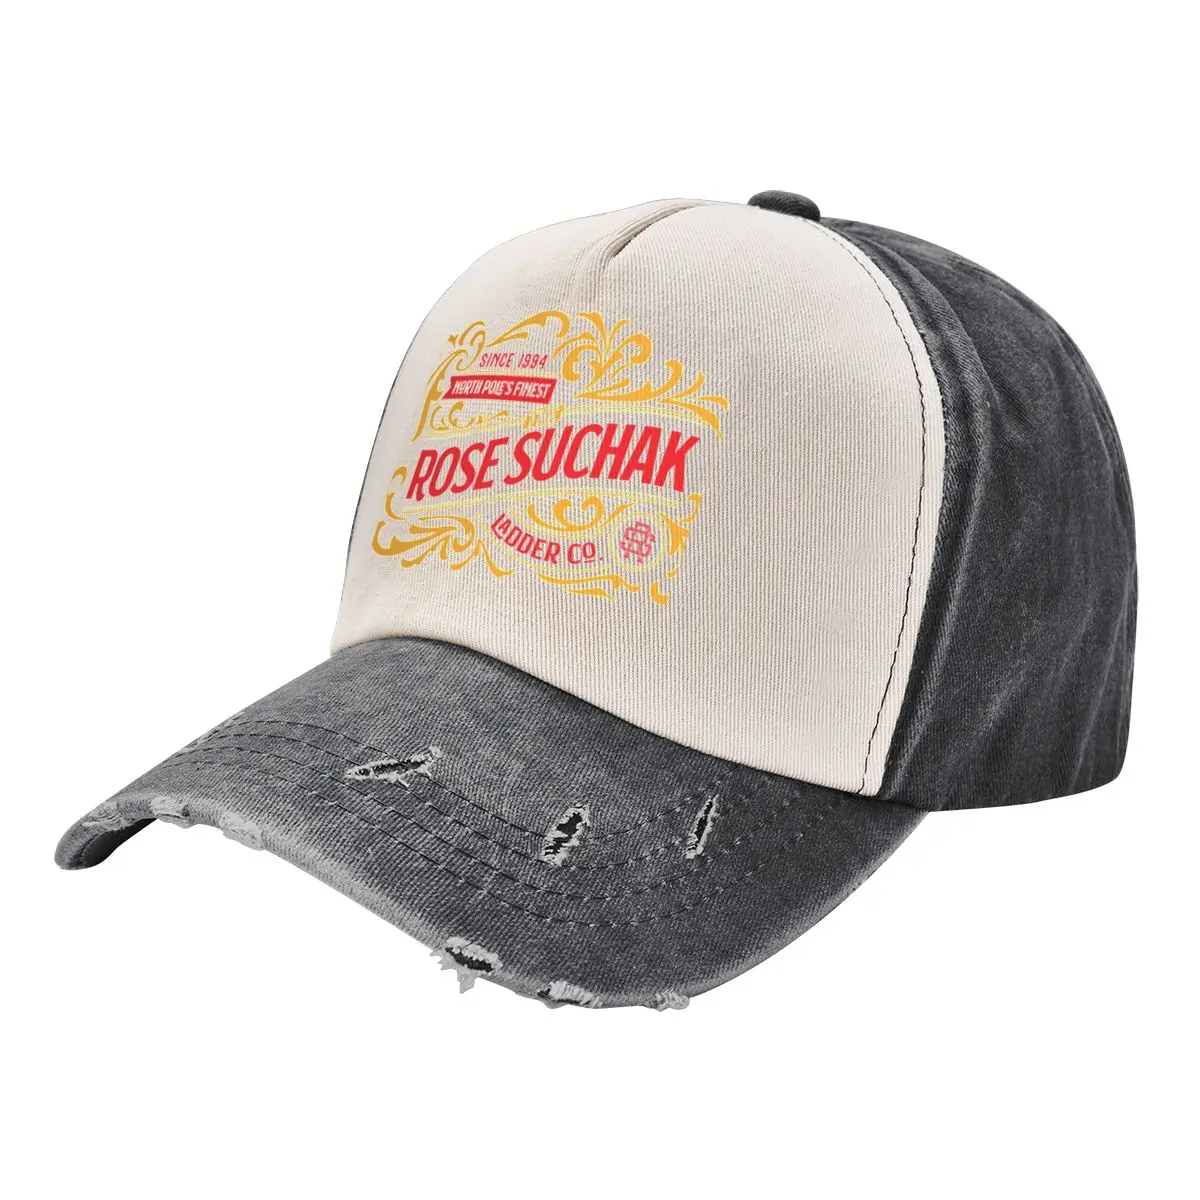 

The Rose Suchak Ladder Co. (Red and Gold on White) Baseball Cap New In Hat Golf Cap Man Women's